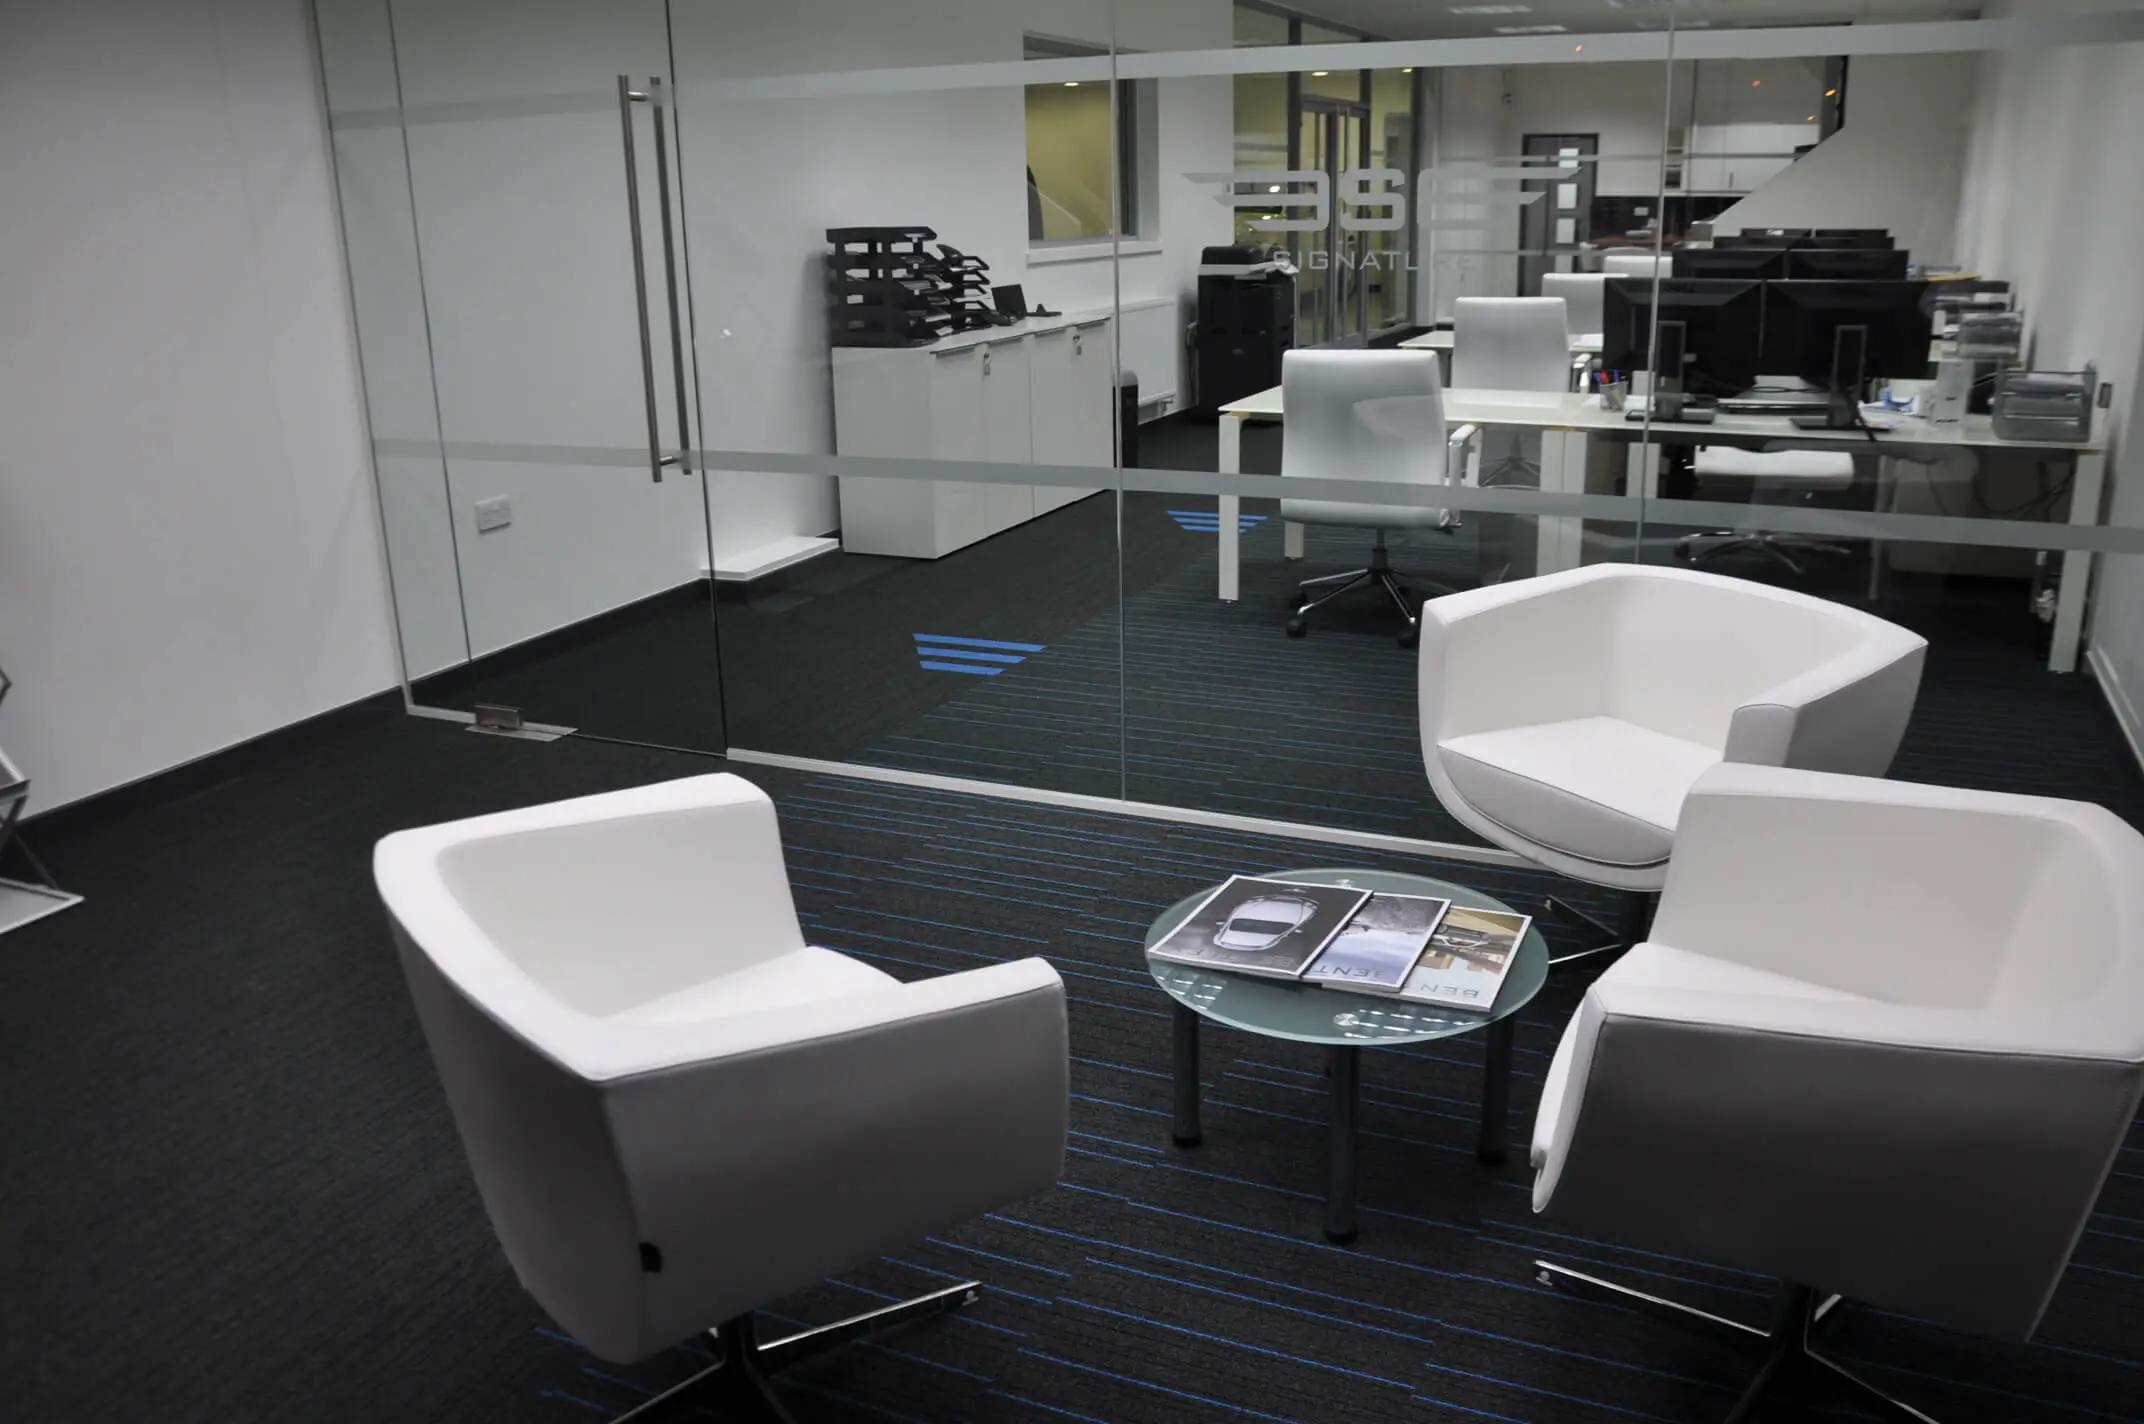 Office Breakout space with single glazed glass partitions